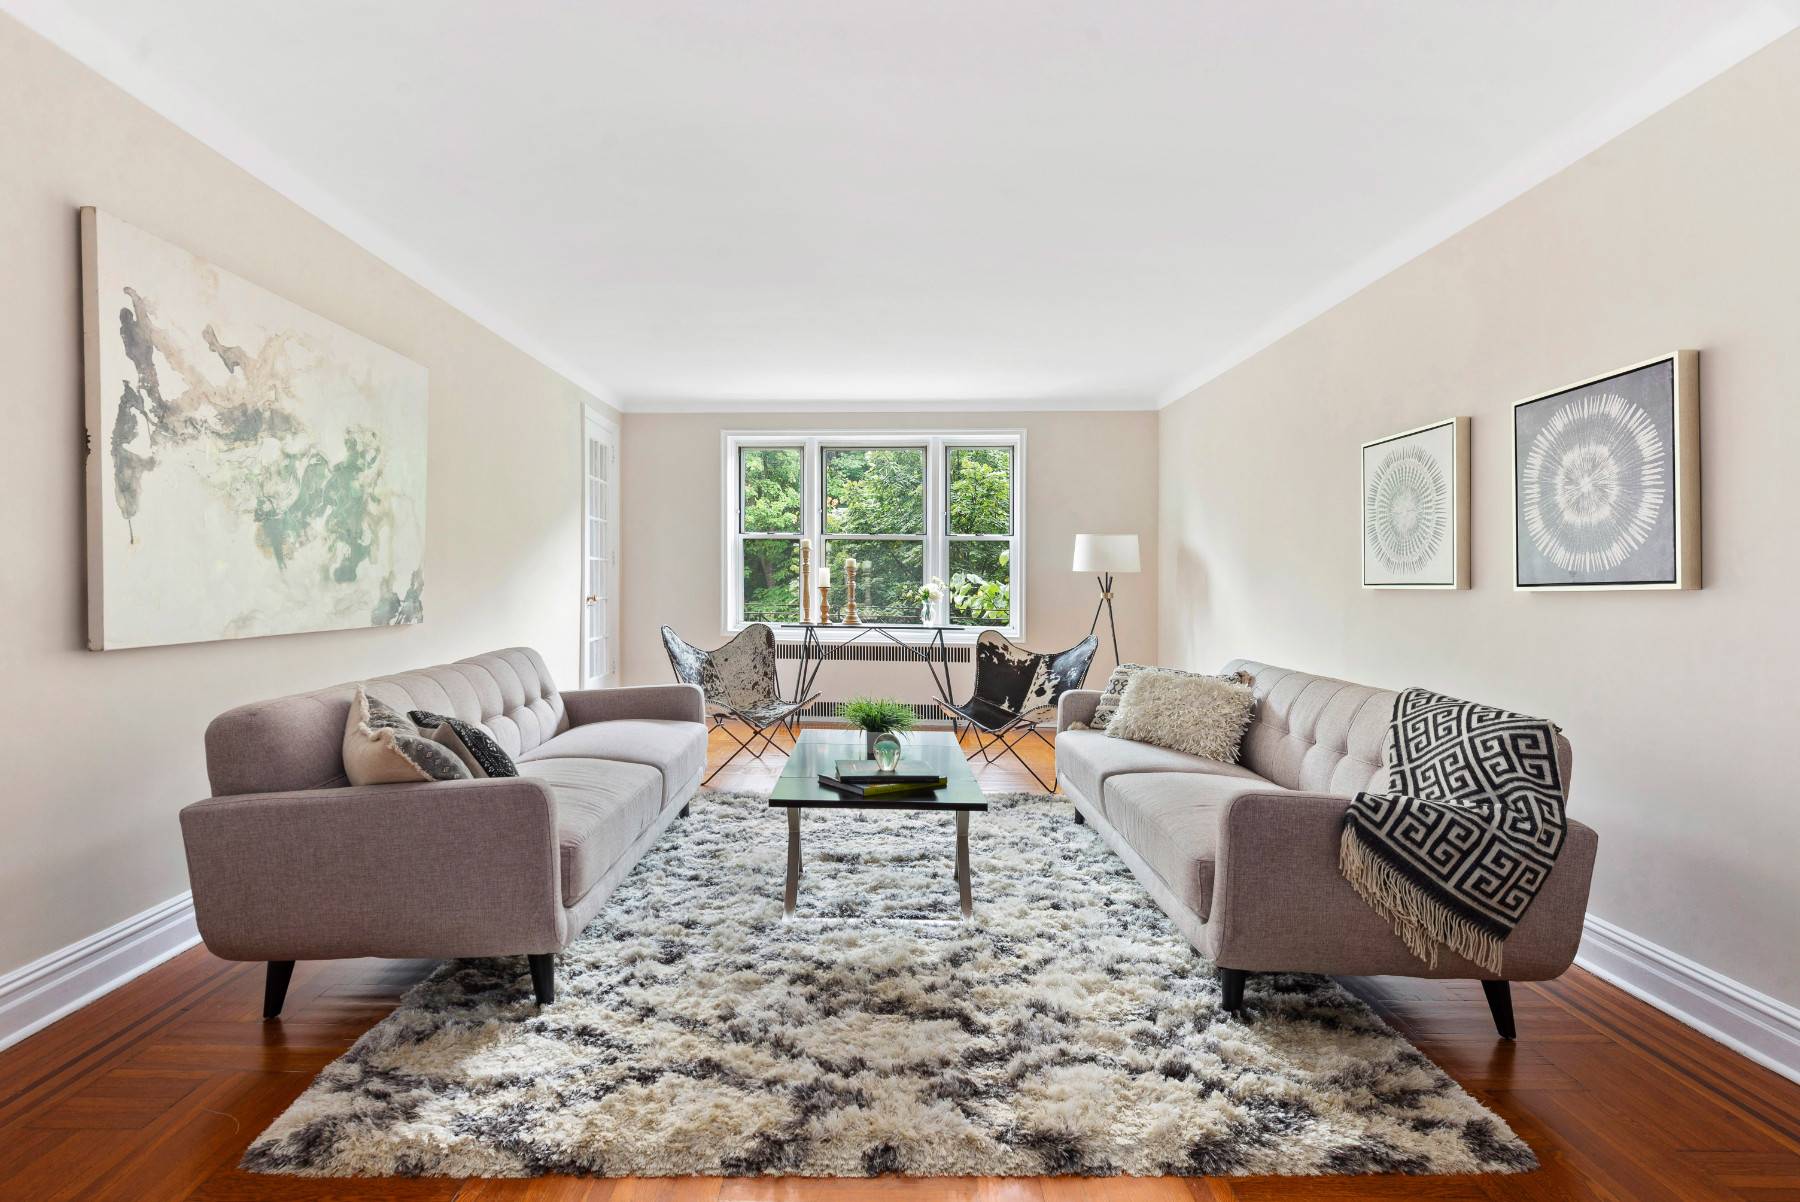 Comfort and convenience await you at 60 Plaza Street East in the heart of vibrant Prospect Heights.